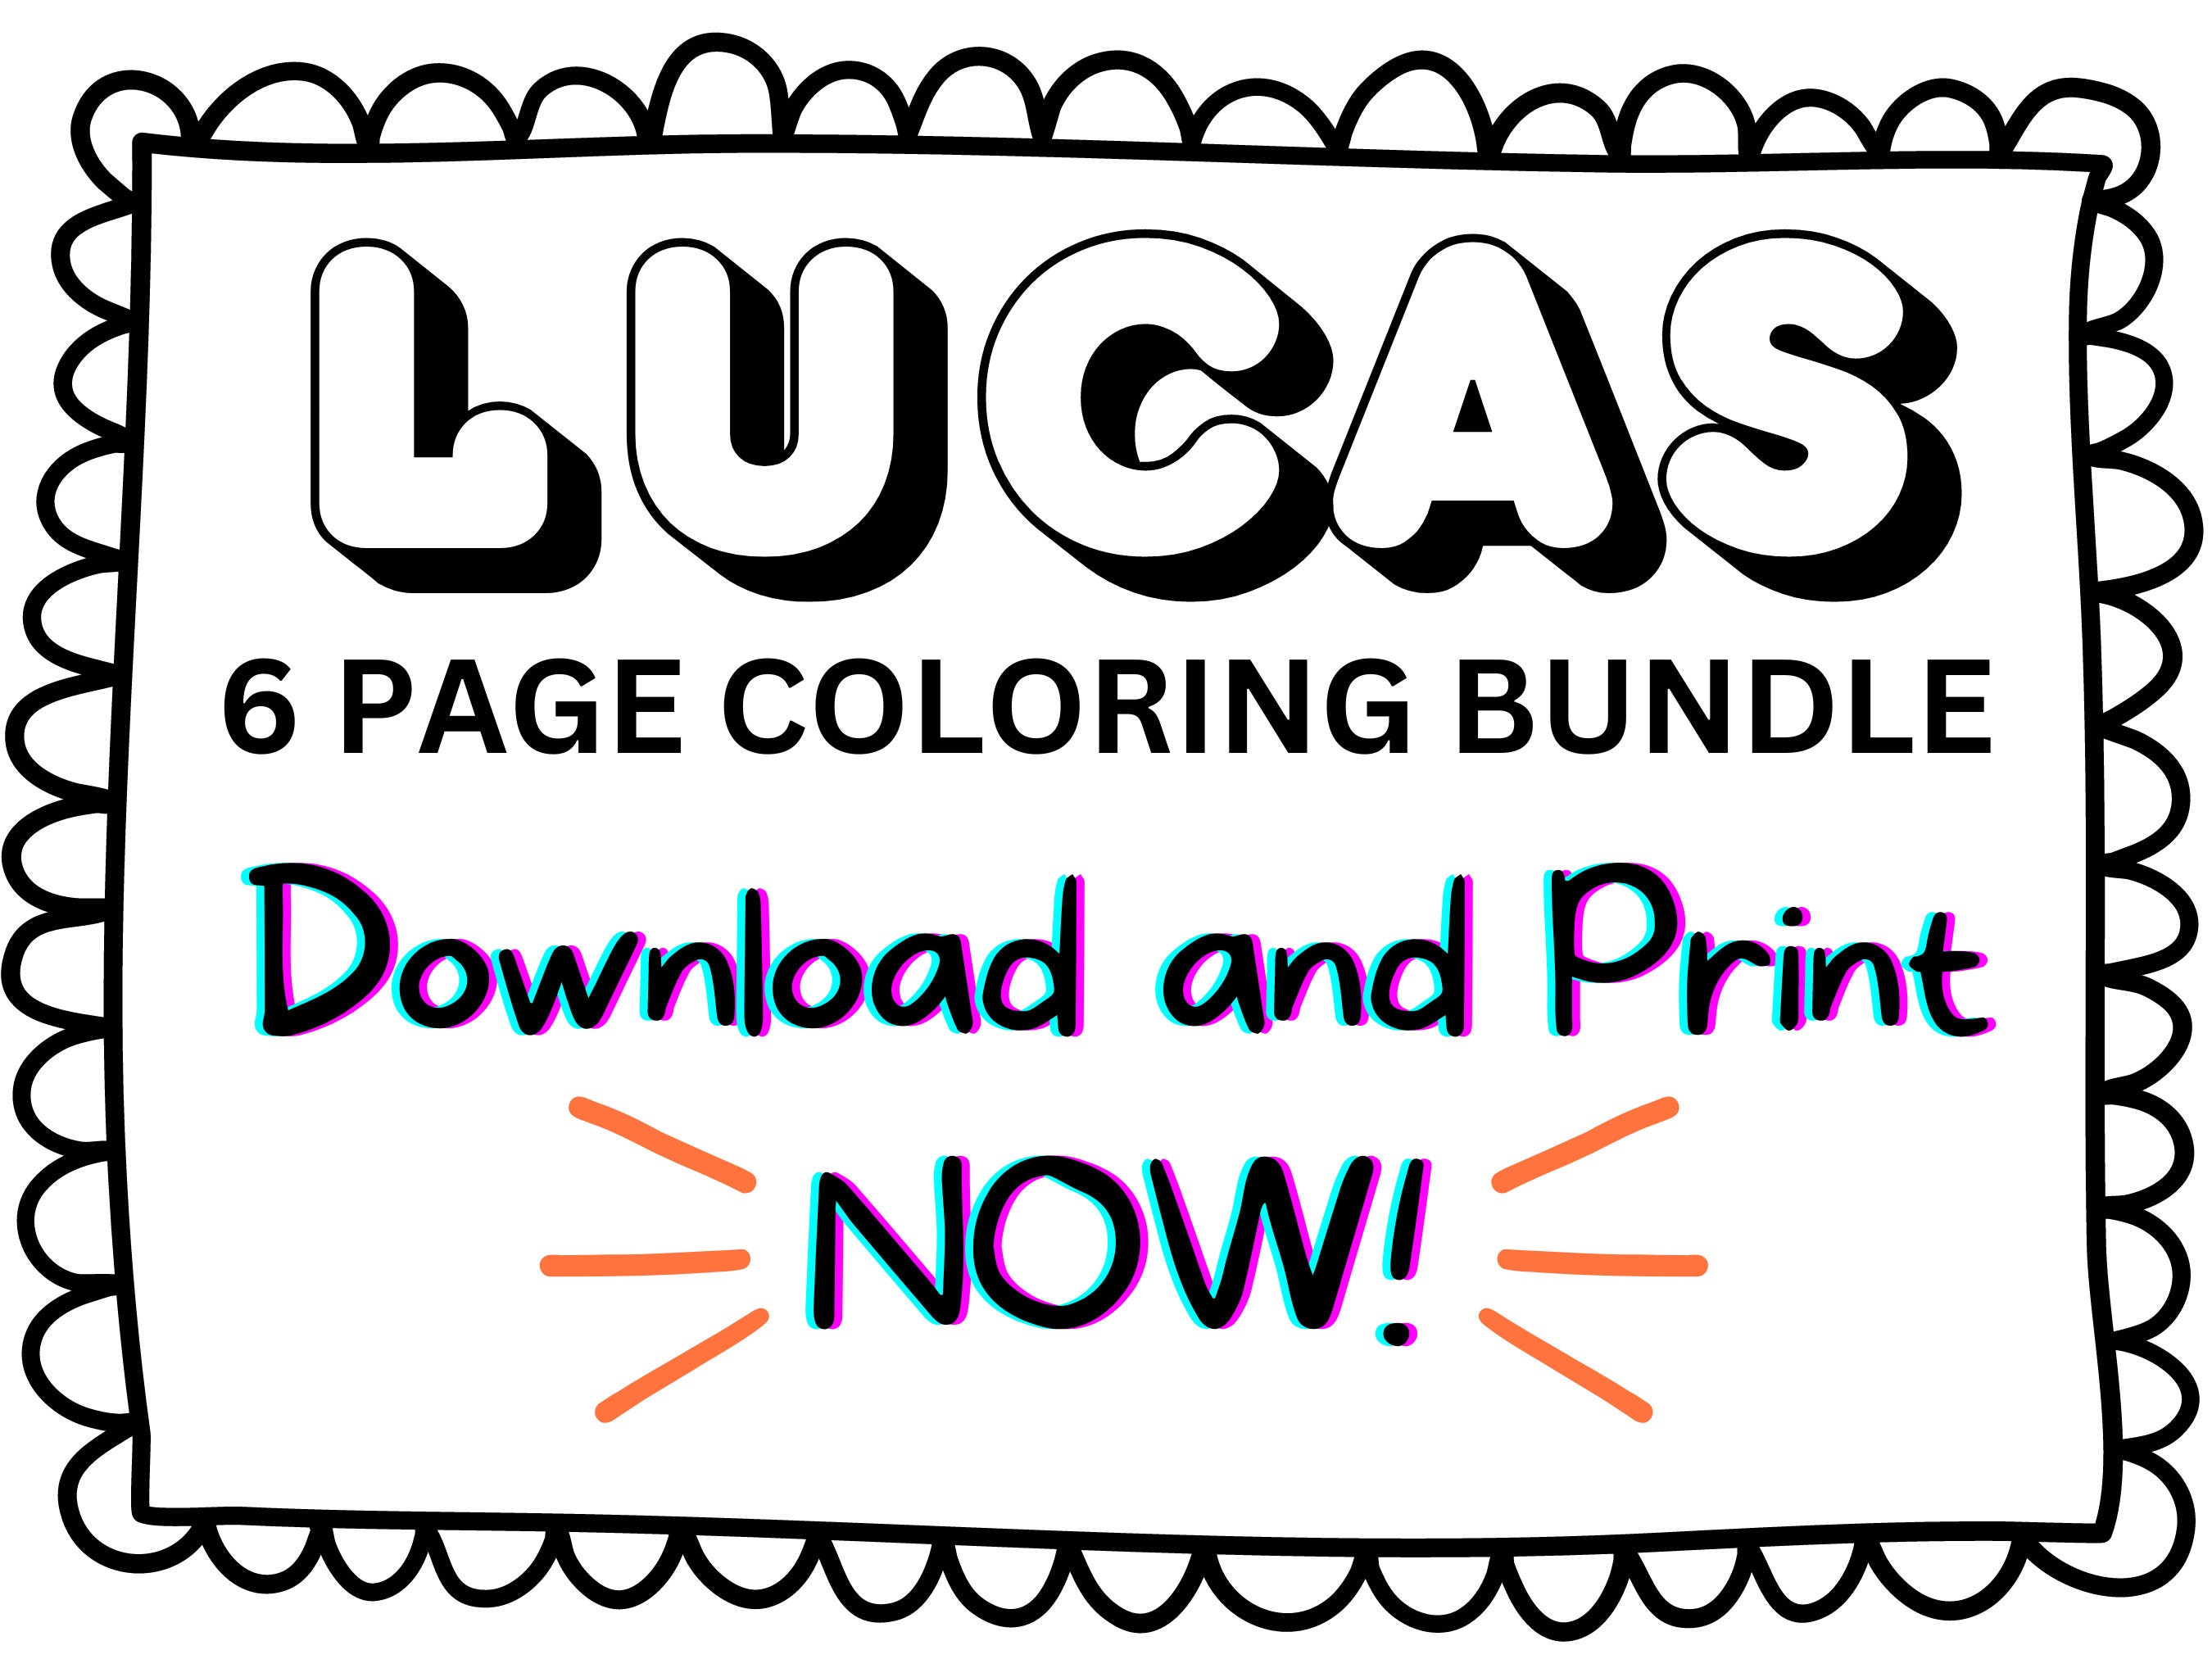 Lucas coloring page printable name coloring page custom coloring personalized gift colouring page kids name sheet